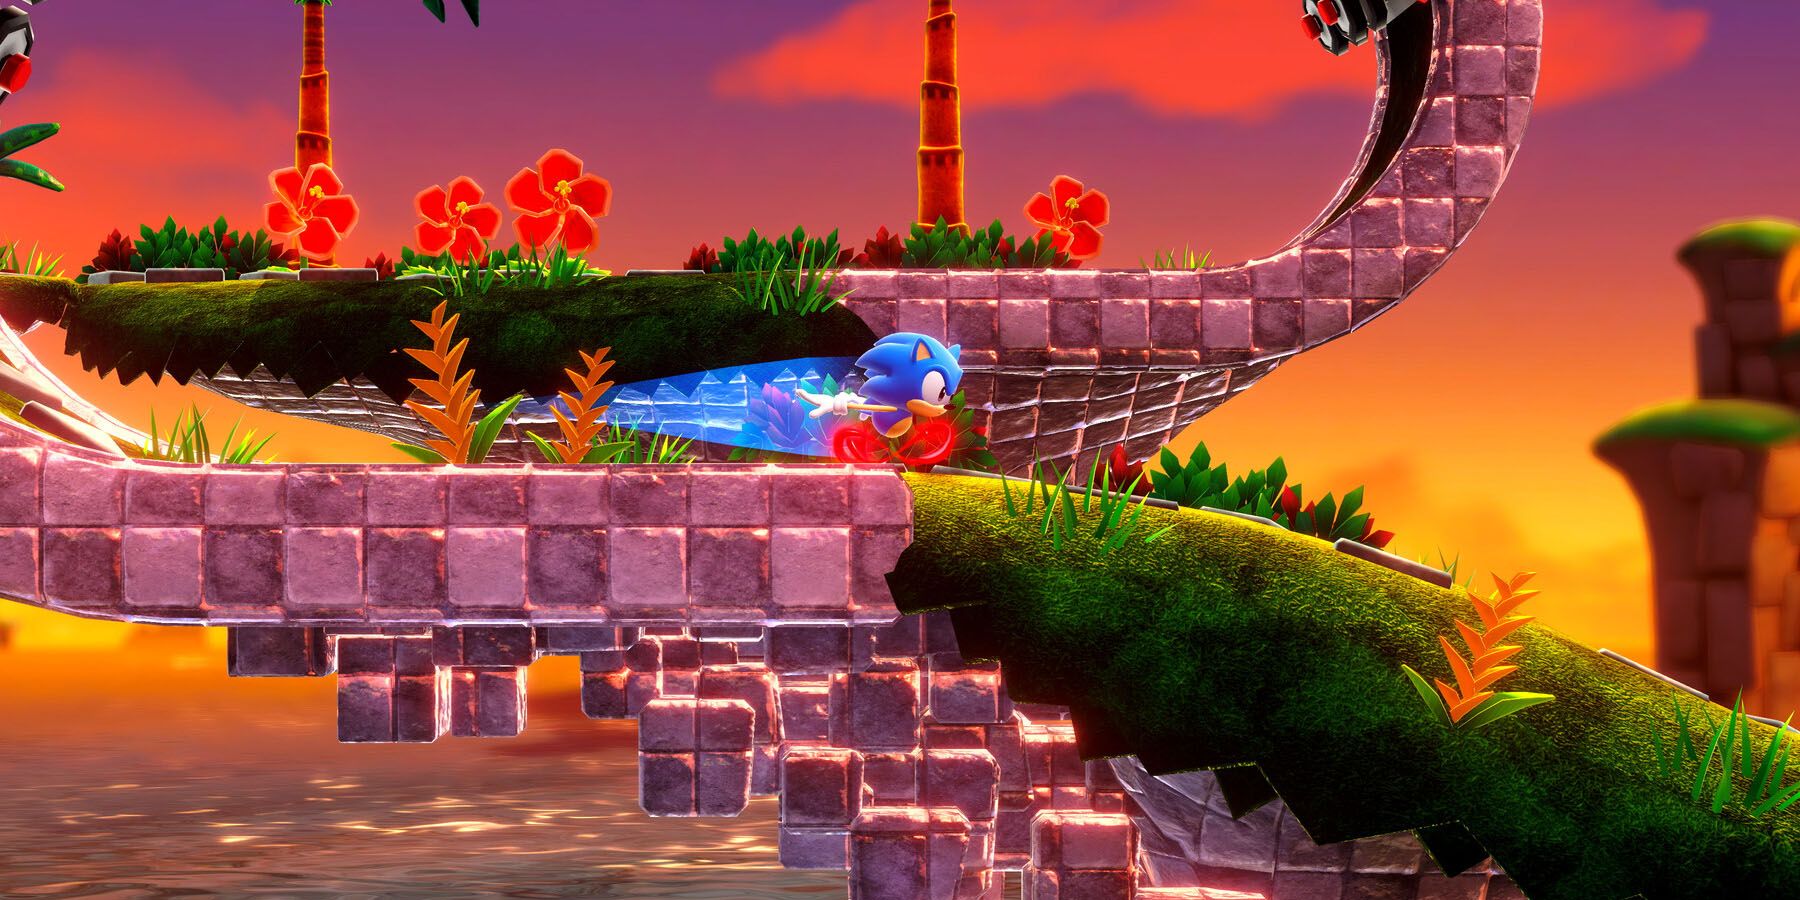 A screenshot of Sonic running through a grassy level at sunset in Sonic Superstars.